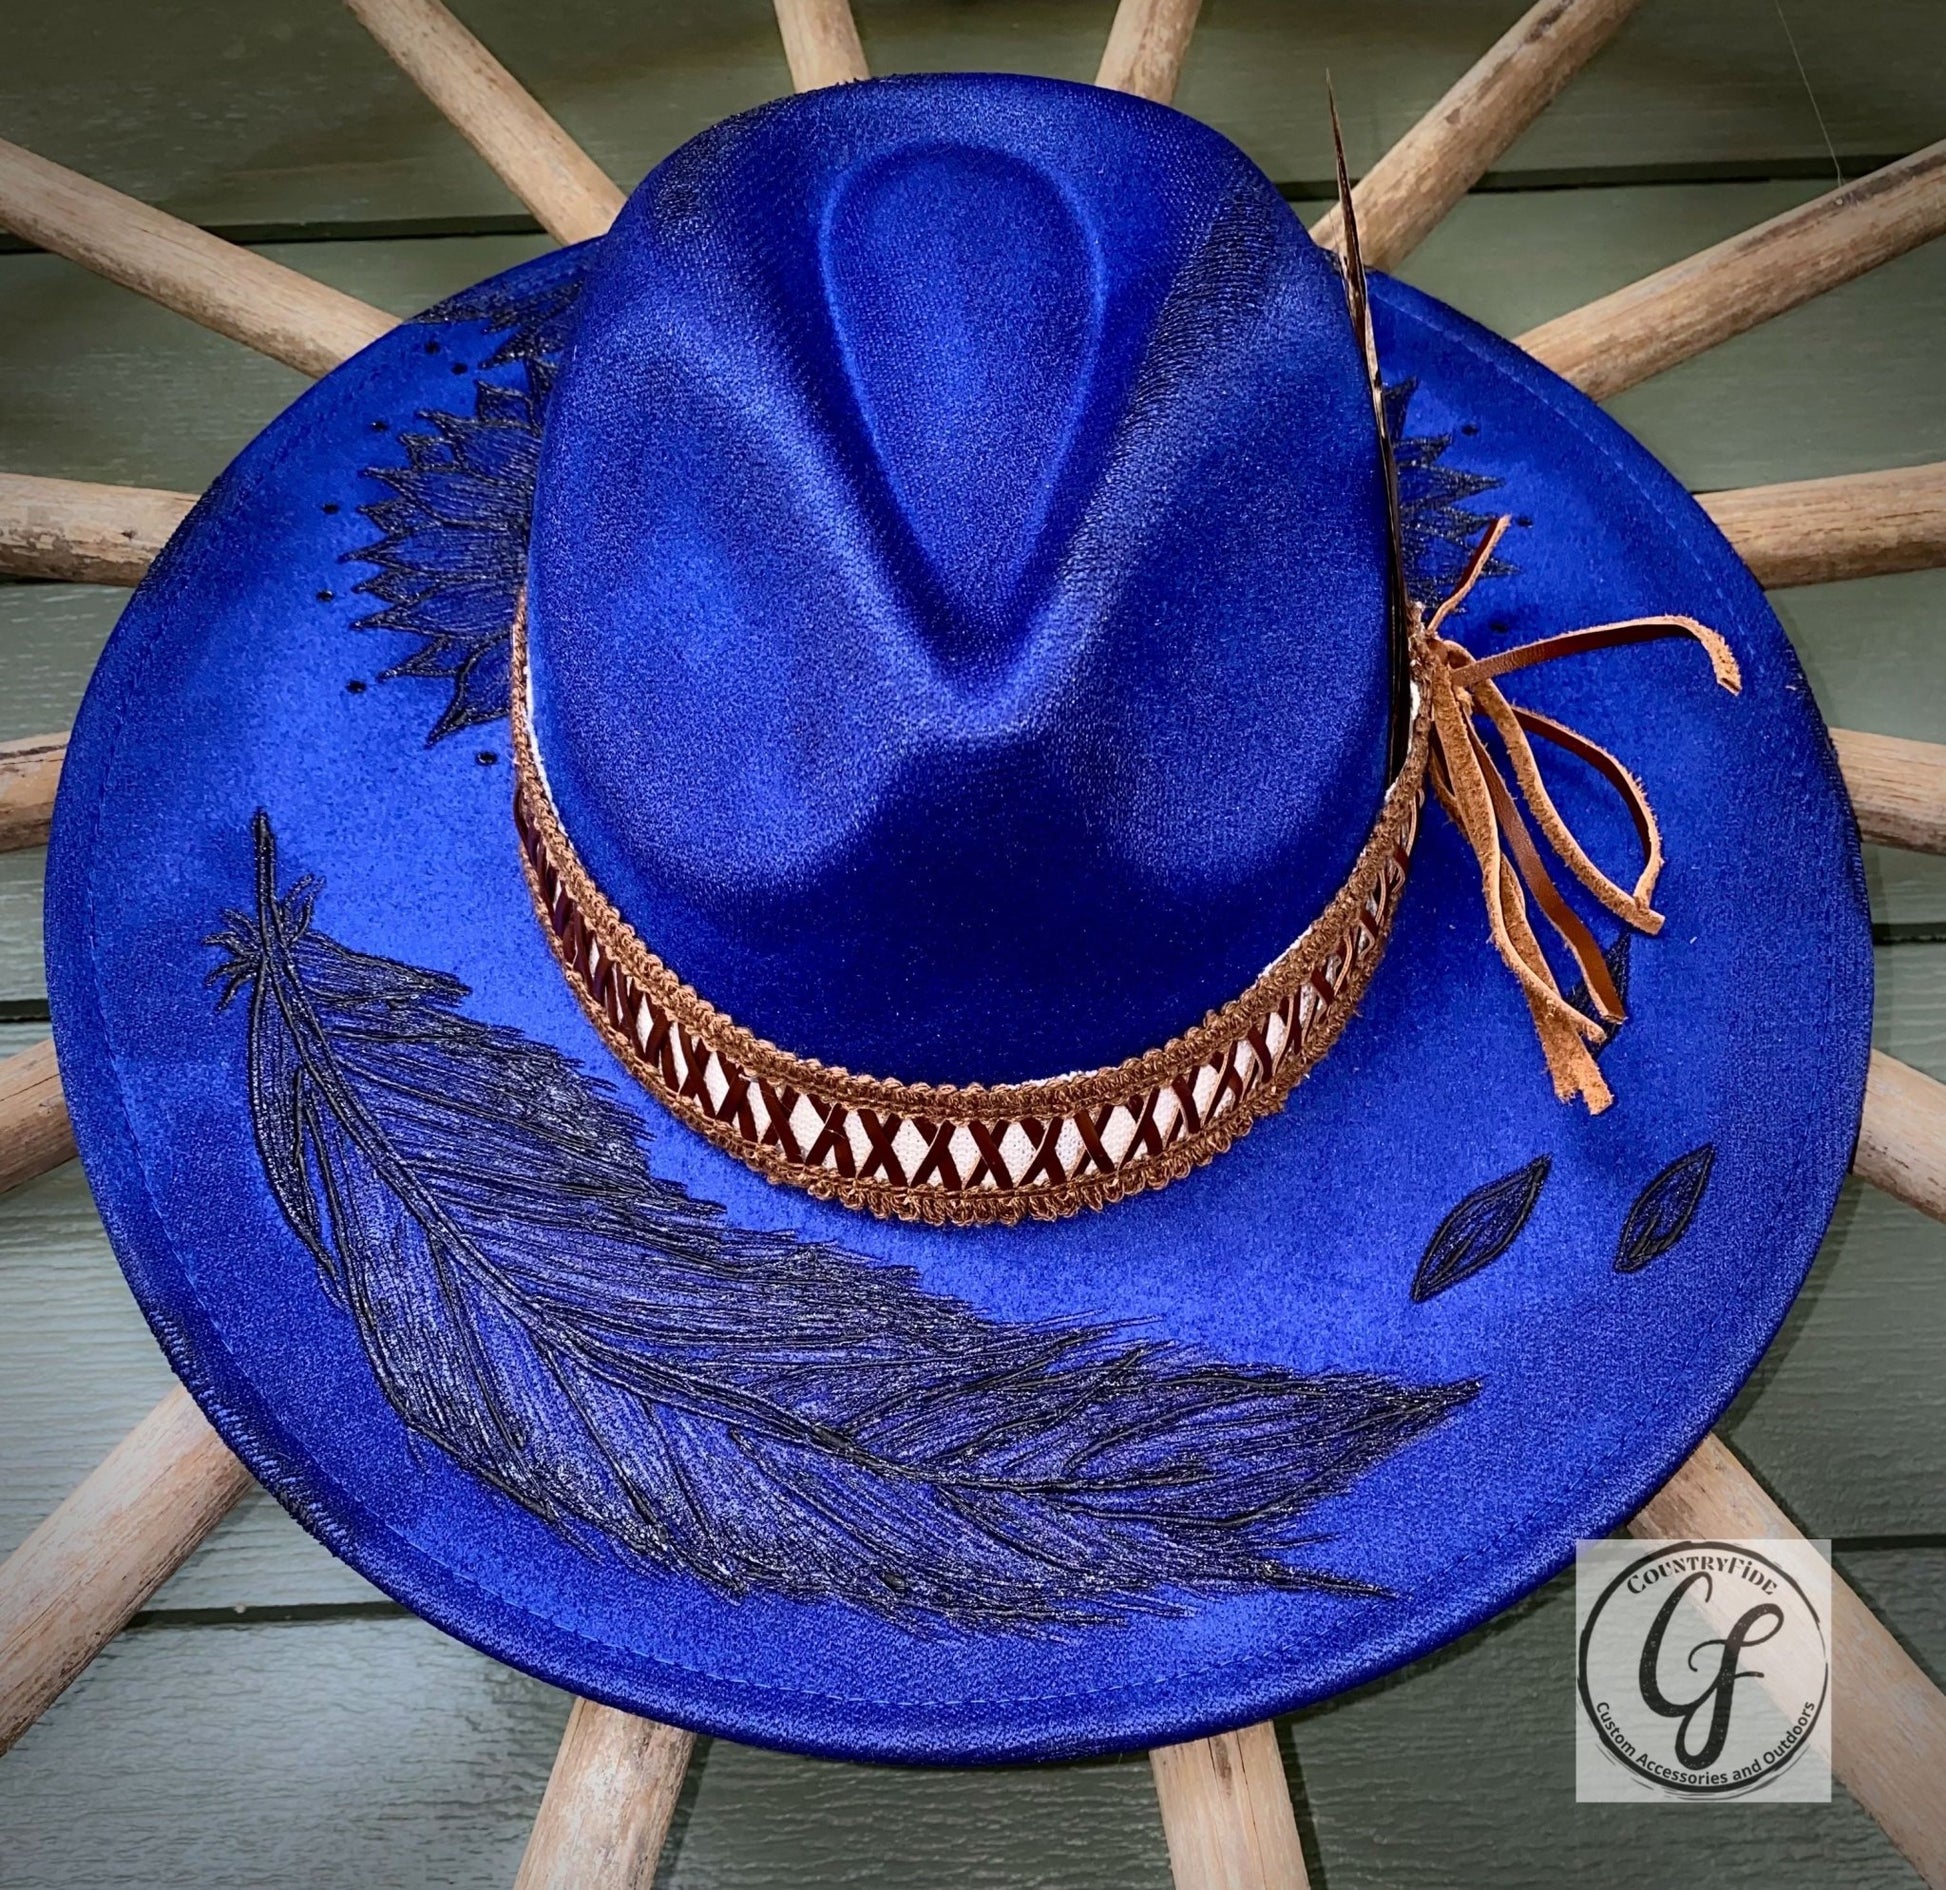 WEARING THE BLUES FEDORA - CountryFide Custom Accessories and Outdoors